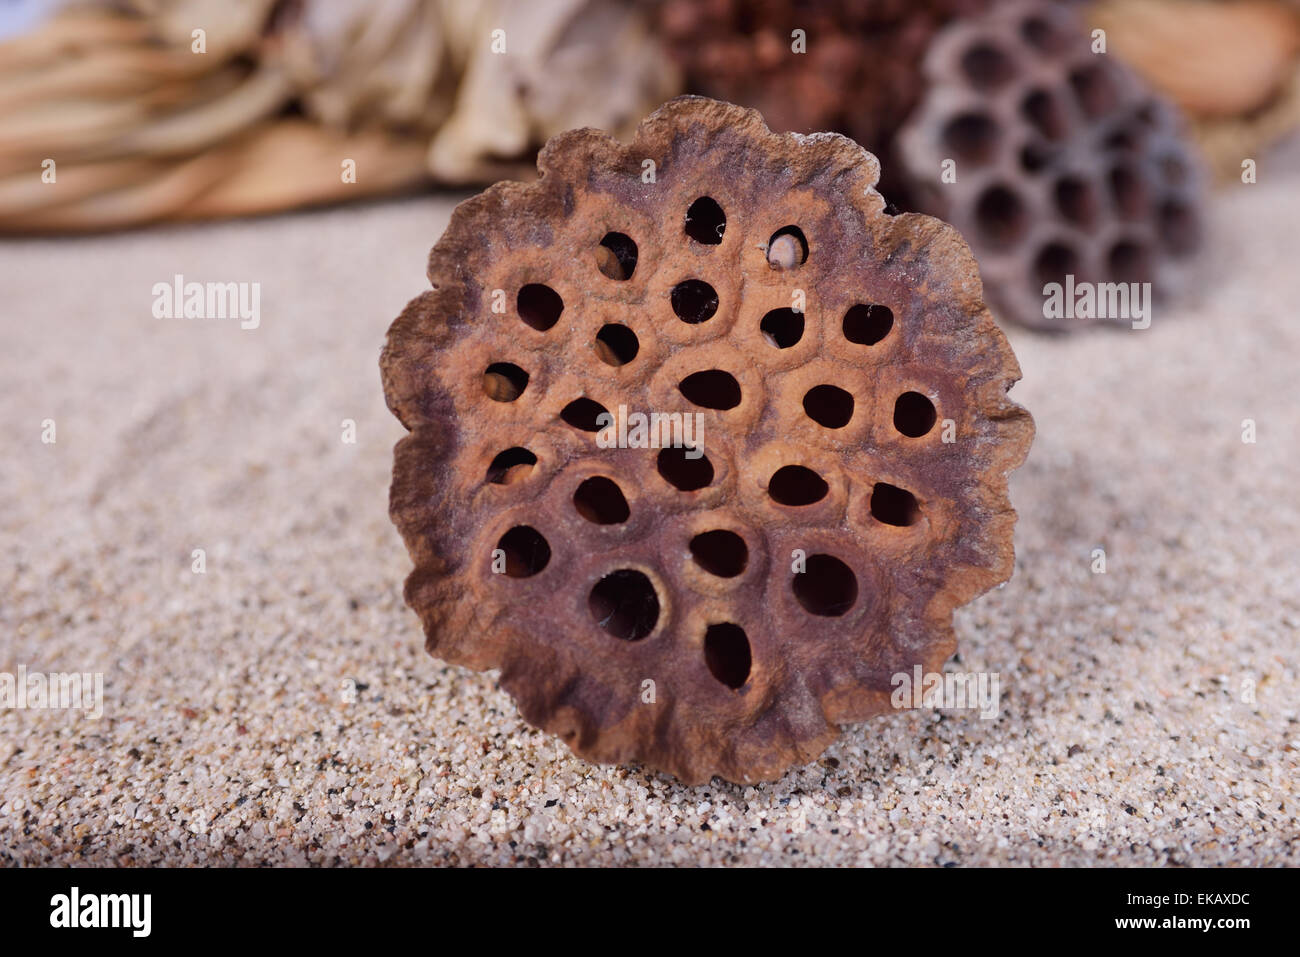 On the dried seedpod of the Lotus in the sand Stock Photo